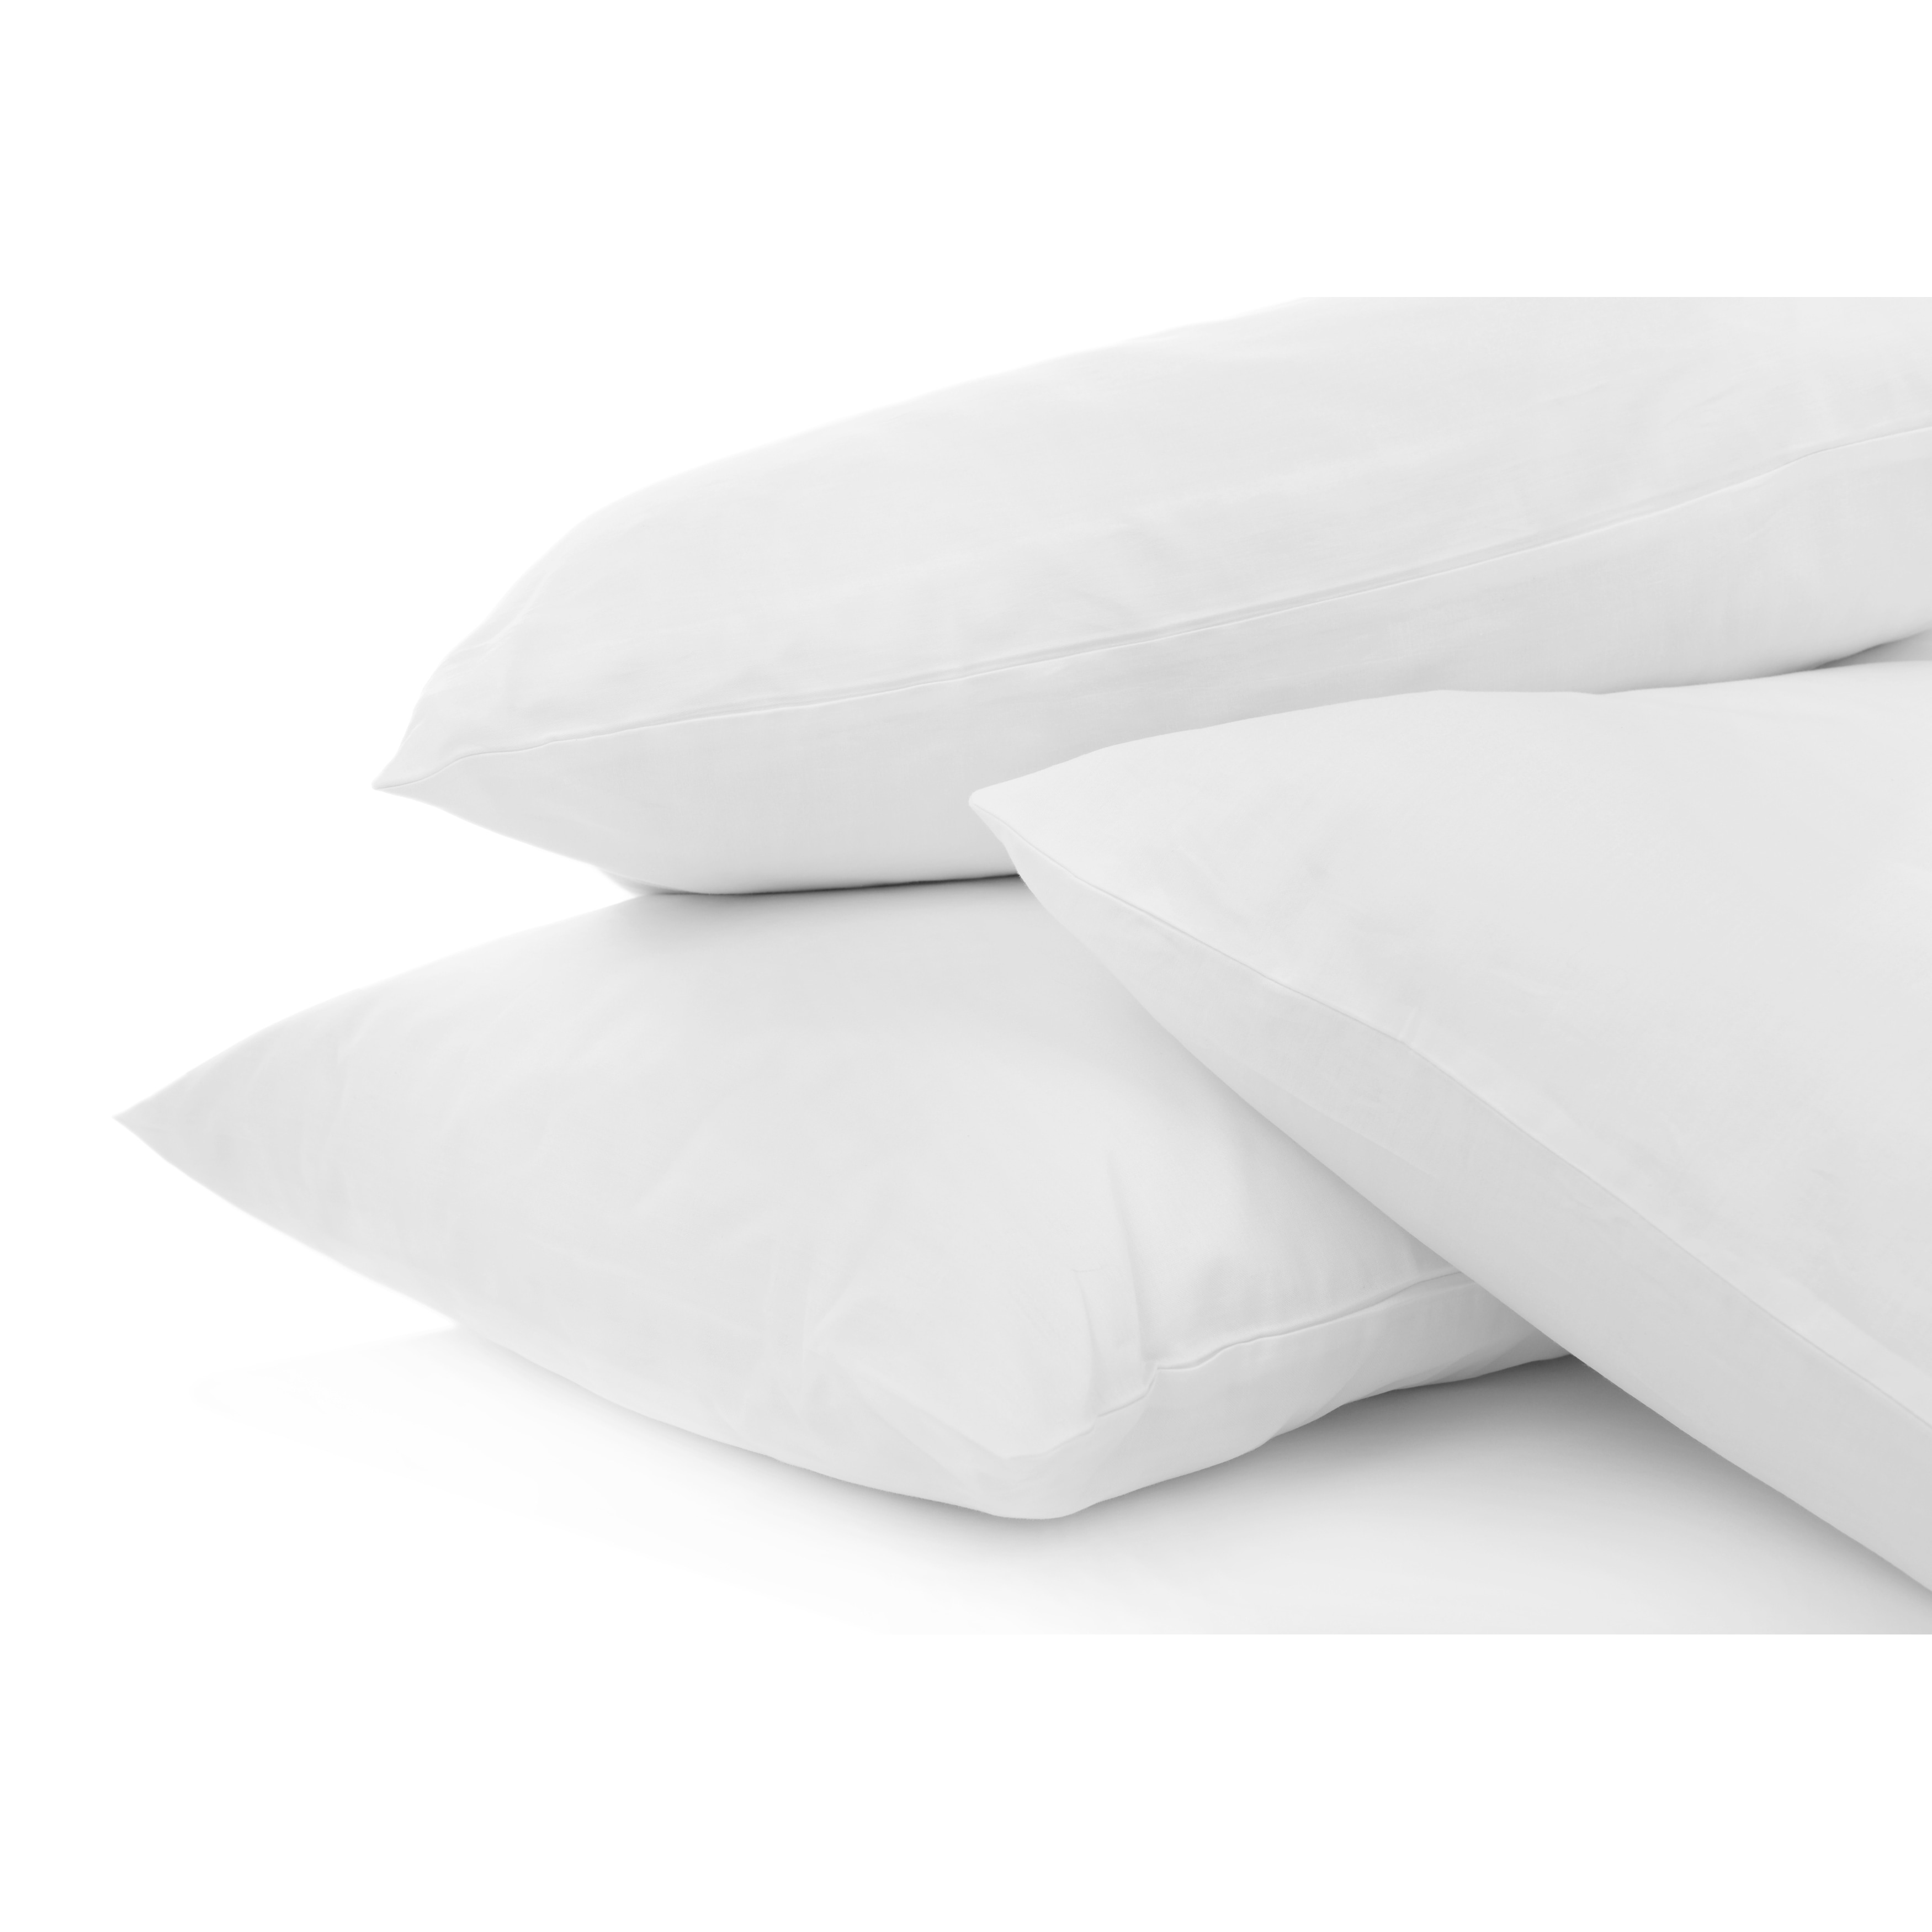 A1hc Pillow Insert Sterilized Extra Hypoallergenic Poly Fill with 200 TC Cotton Shell, Set of 2, Size: 22 x 22, White